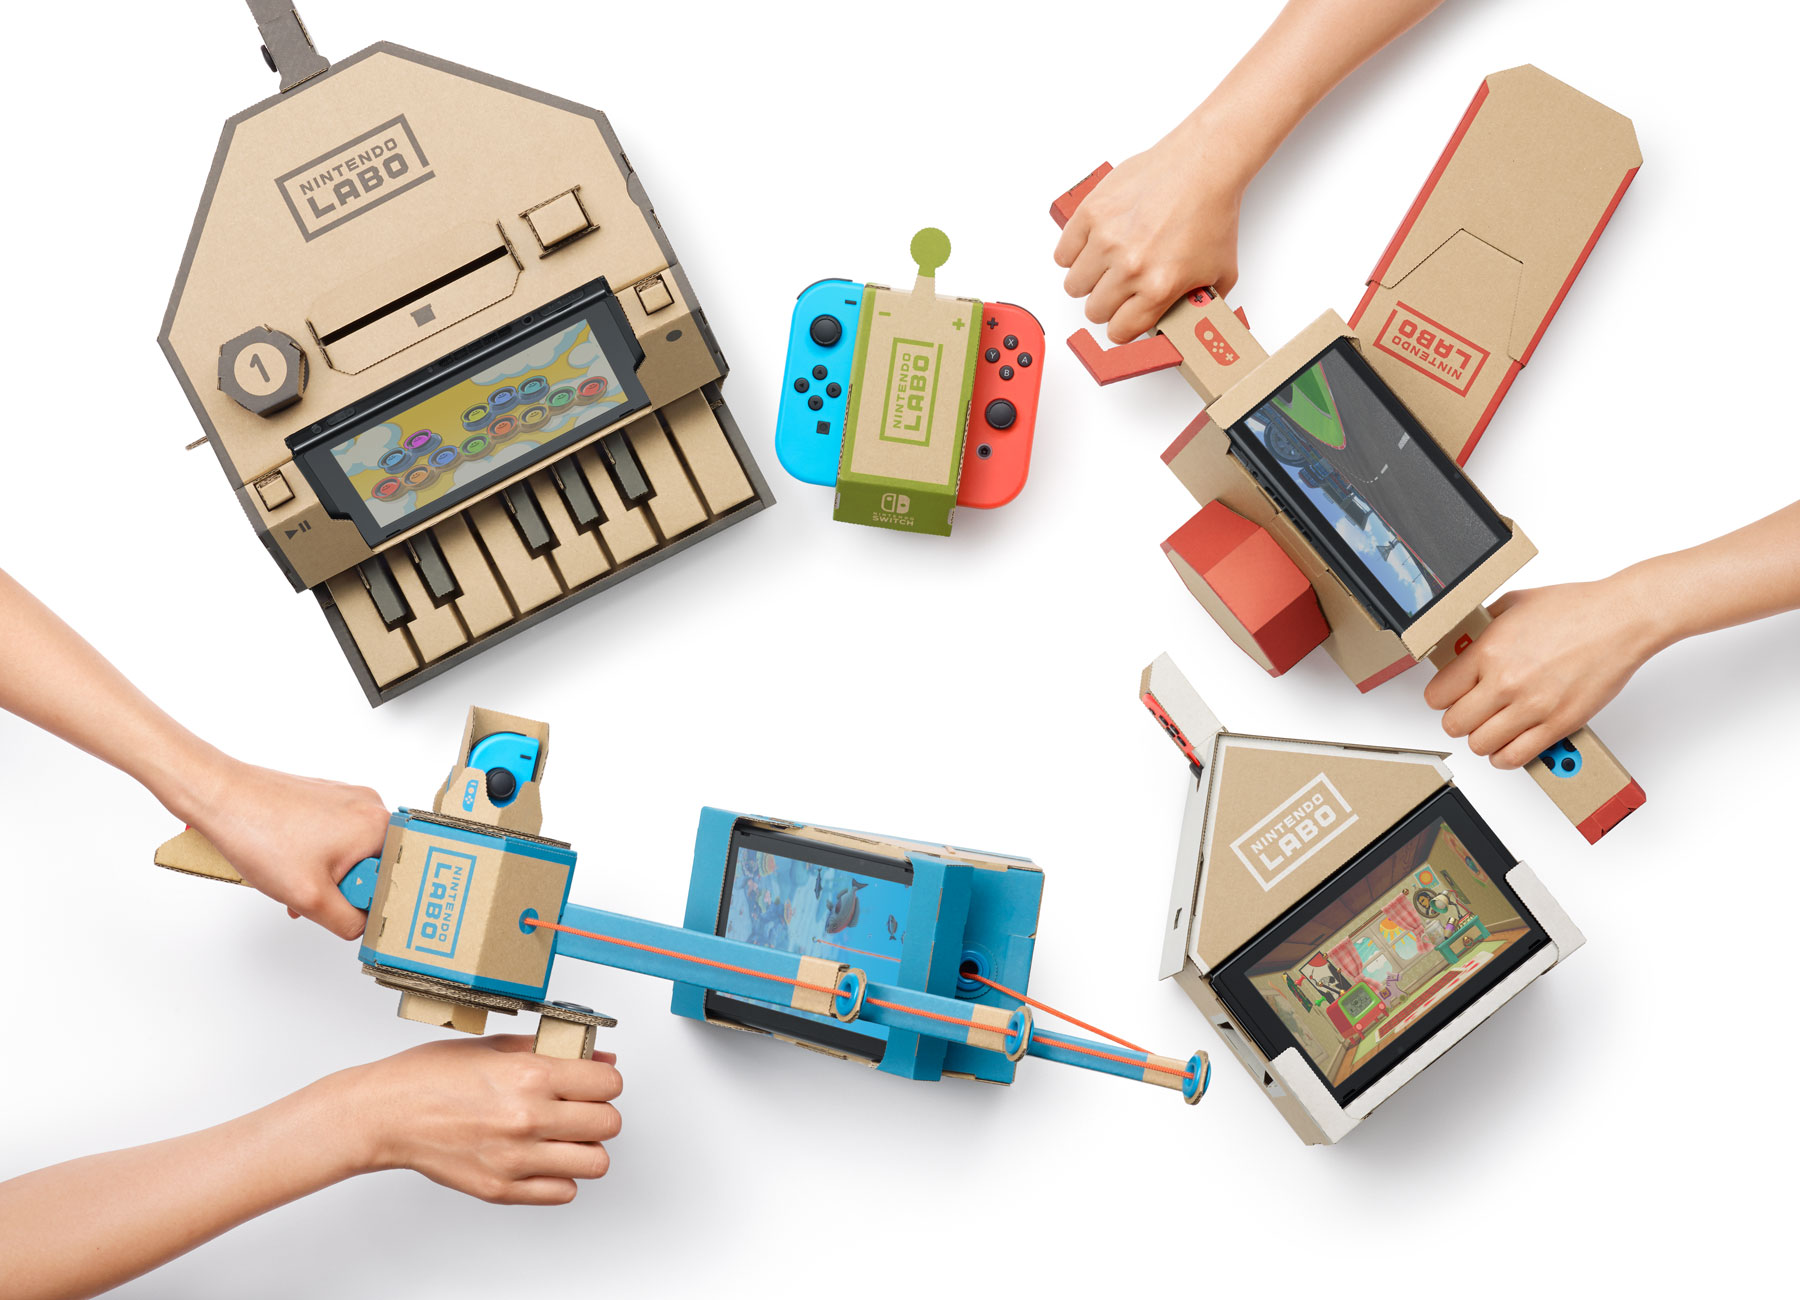 Cardboard accesories for the Switch console by Nintendo Labo.